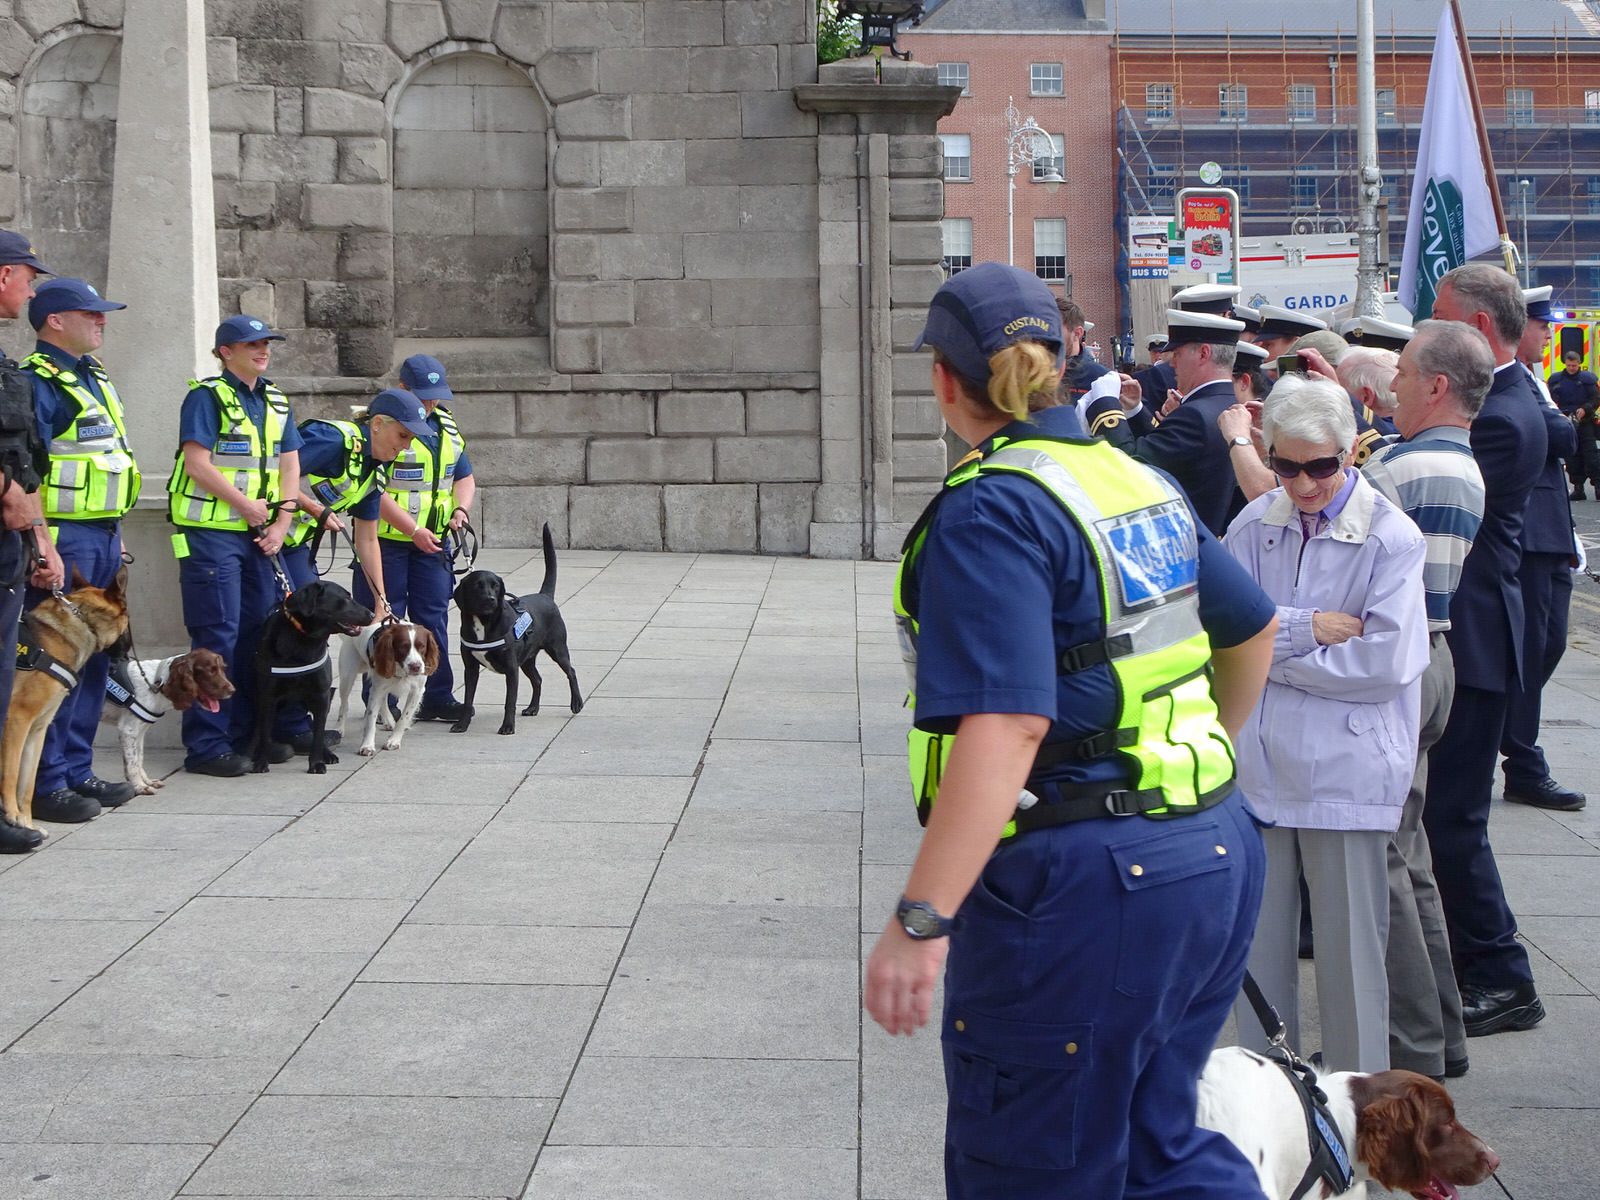 THE DOGS WHO WORK FOR THE IRISH CUSTOMS SERVICE [INVITED THE PRESS TO A PHOTO-SHOOT]-225737-1